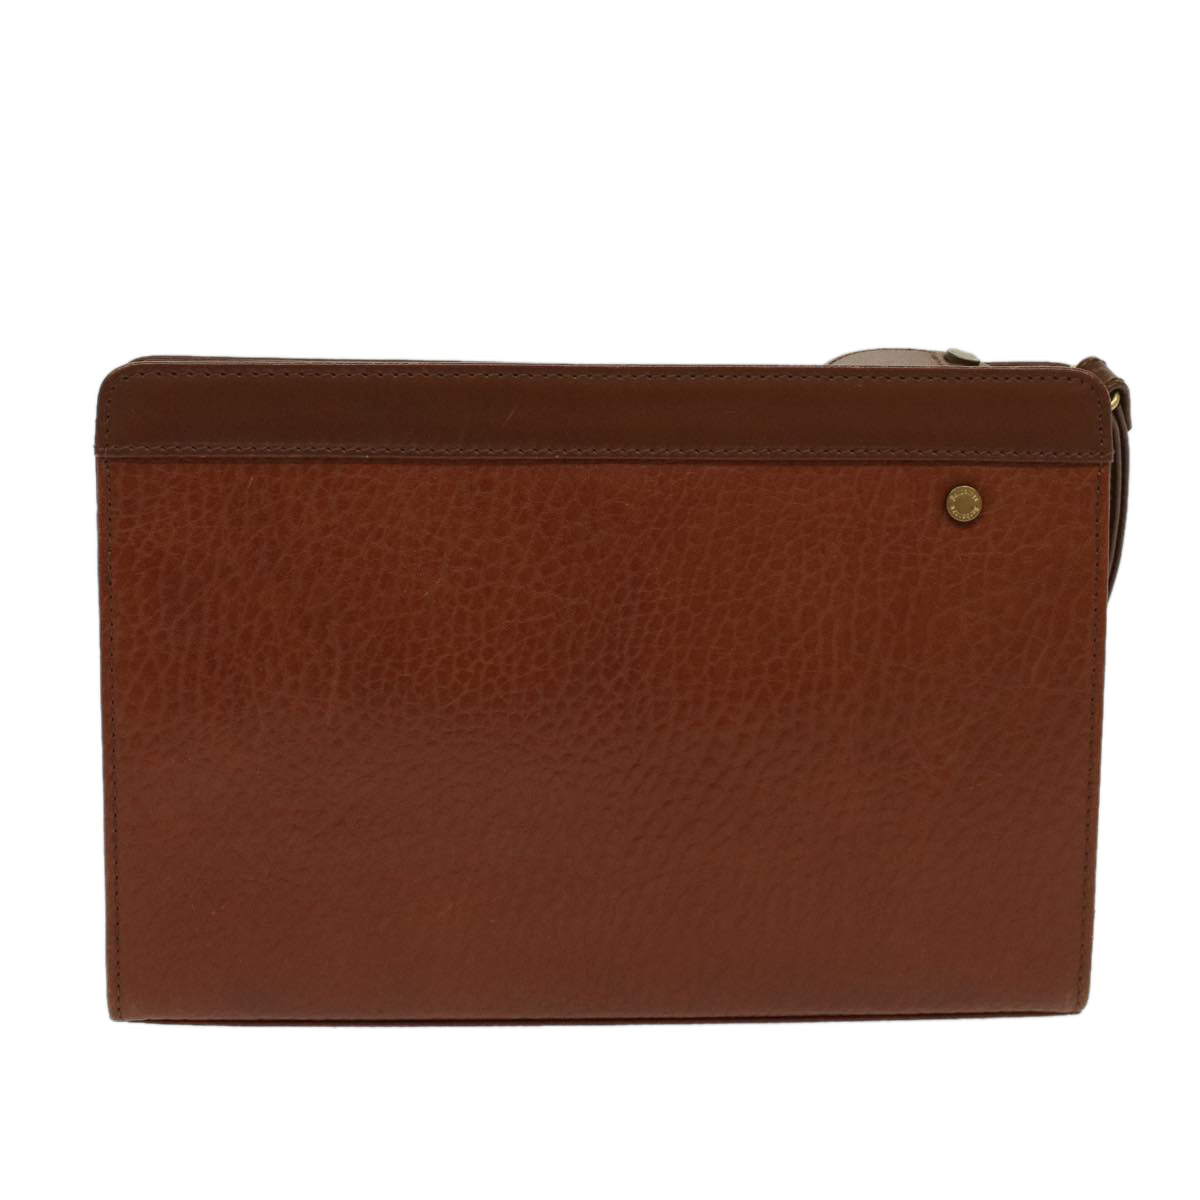 Burberrys Clutch Bag Leather Brown Auth yk7778 - 0